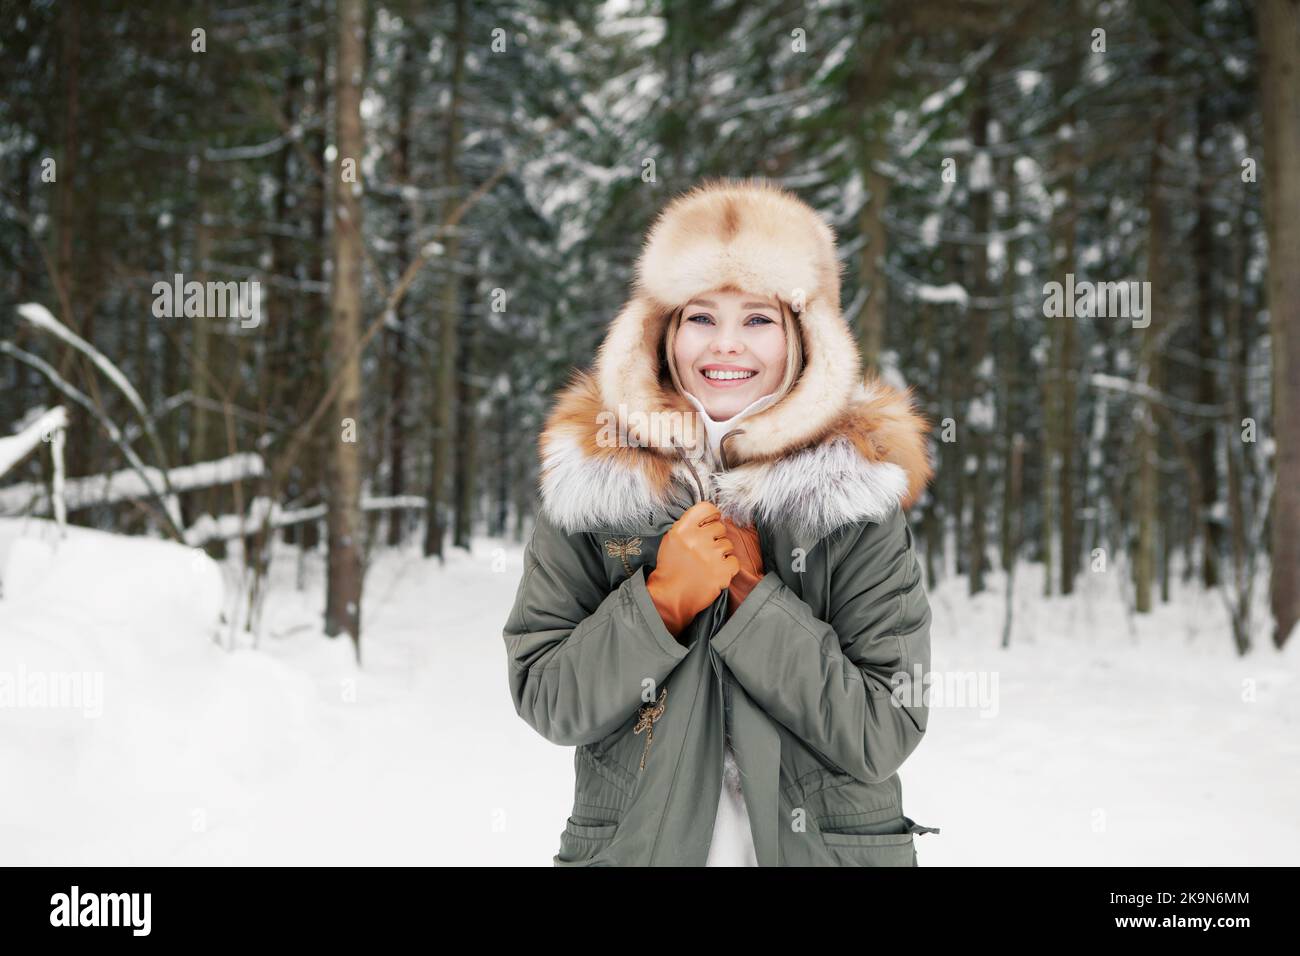 Smiling young woman in khaki parka, ear flaps ushanka hat and leather gloves at snowy coniferous forest background. Happy blonde model with beautiful Stock Photo